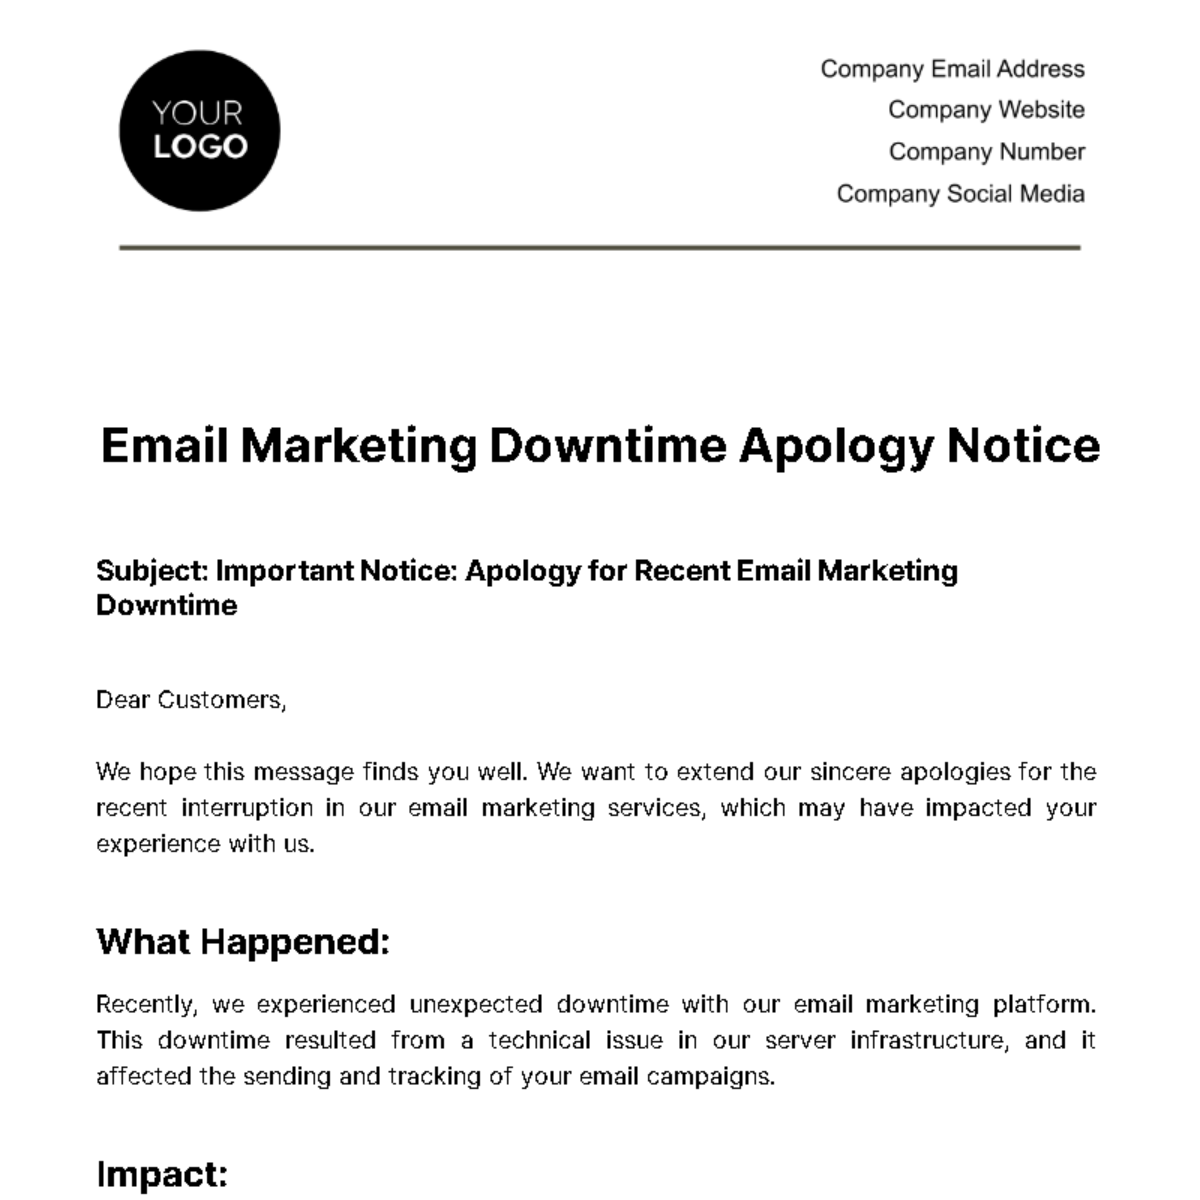 Free Email Marketing Downtime Apology Notice Template